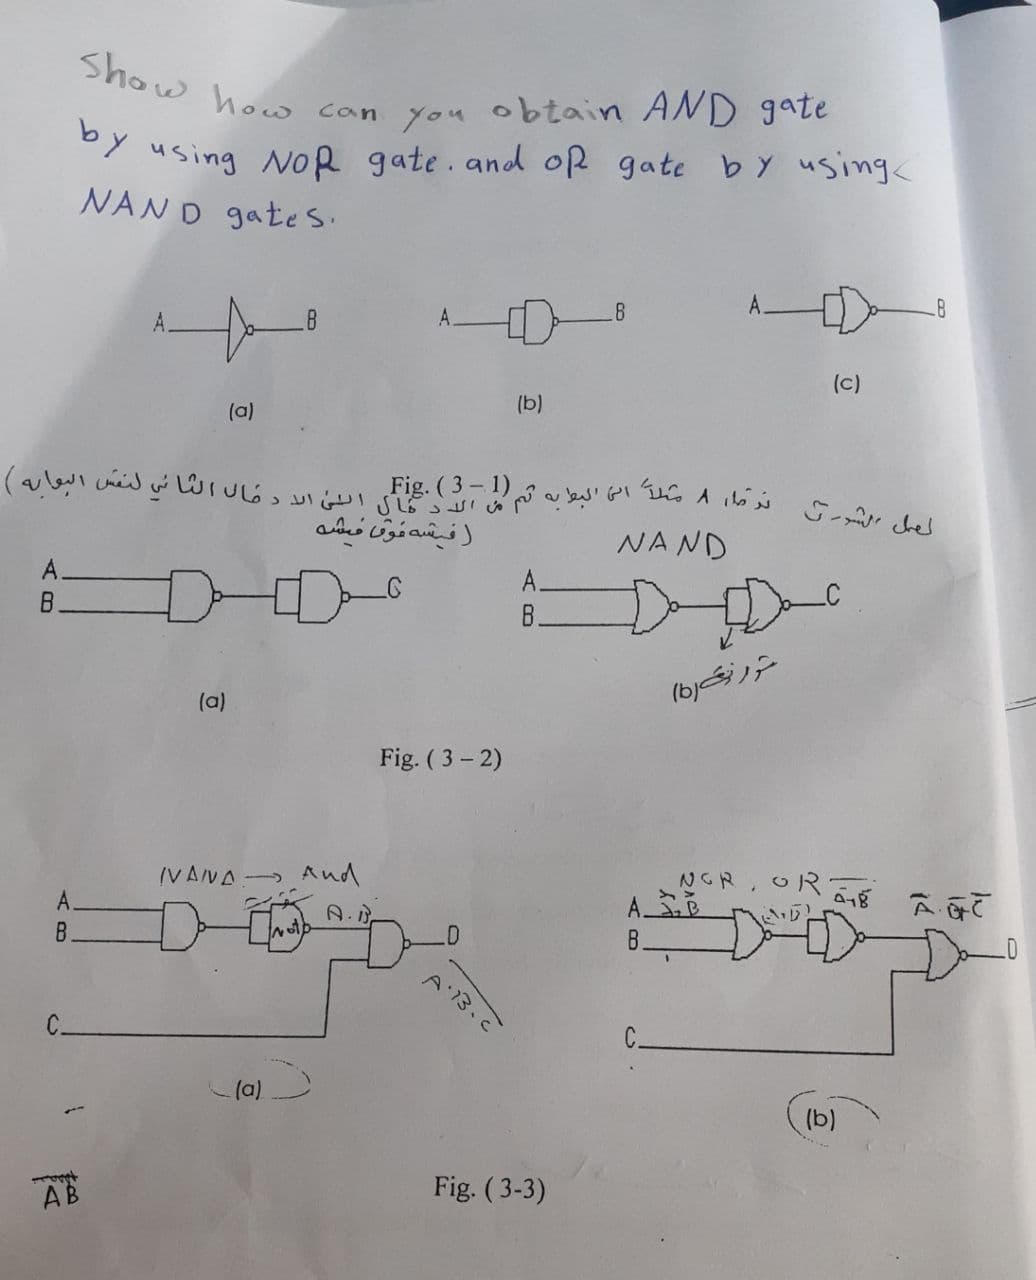 Show how
obtain AND gate
Can
you
y using NoR gate.and oR gate by using
NAND gates.
8
A.
(c)
(b)
(a)
Fig. ( 3 - 1)
فيشه فوقا میشه
NAND
A.
A.
B.
DD-
B.
(a)
Fig. ( 3 - 2)
IVAVA And
A.N.
A'13.C
C.
C.
(a)
((b)
Fig. (3-3)
AB
AB
